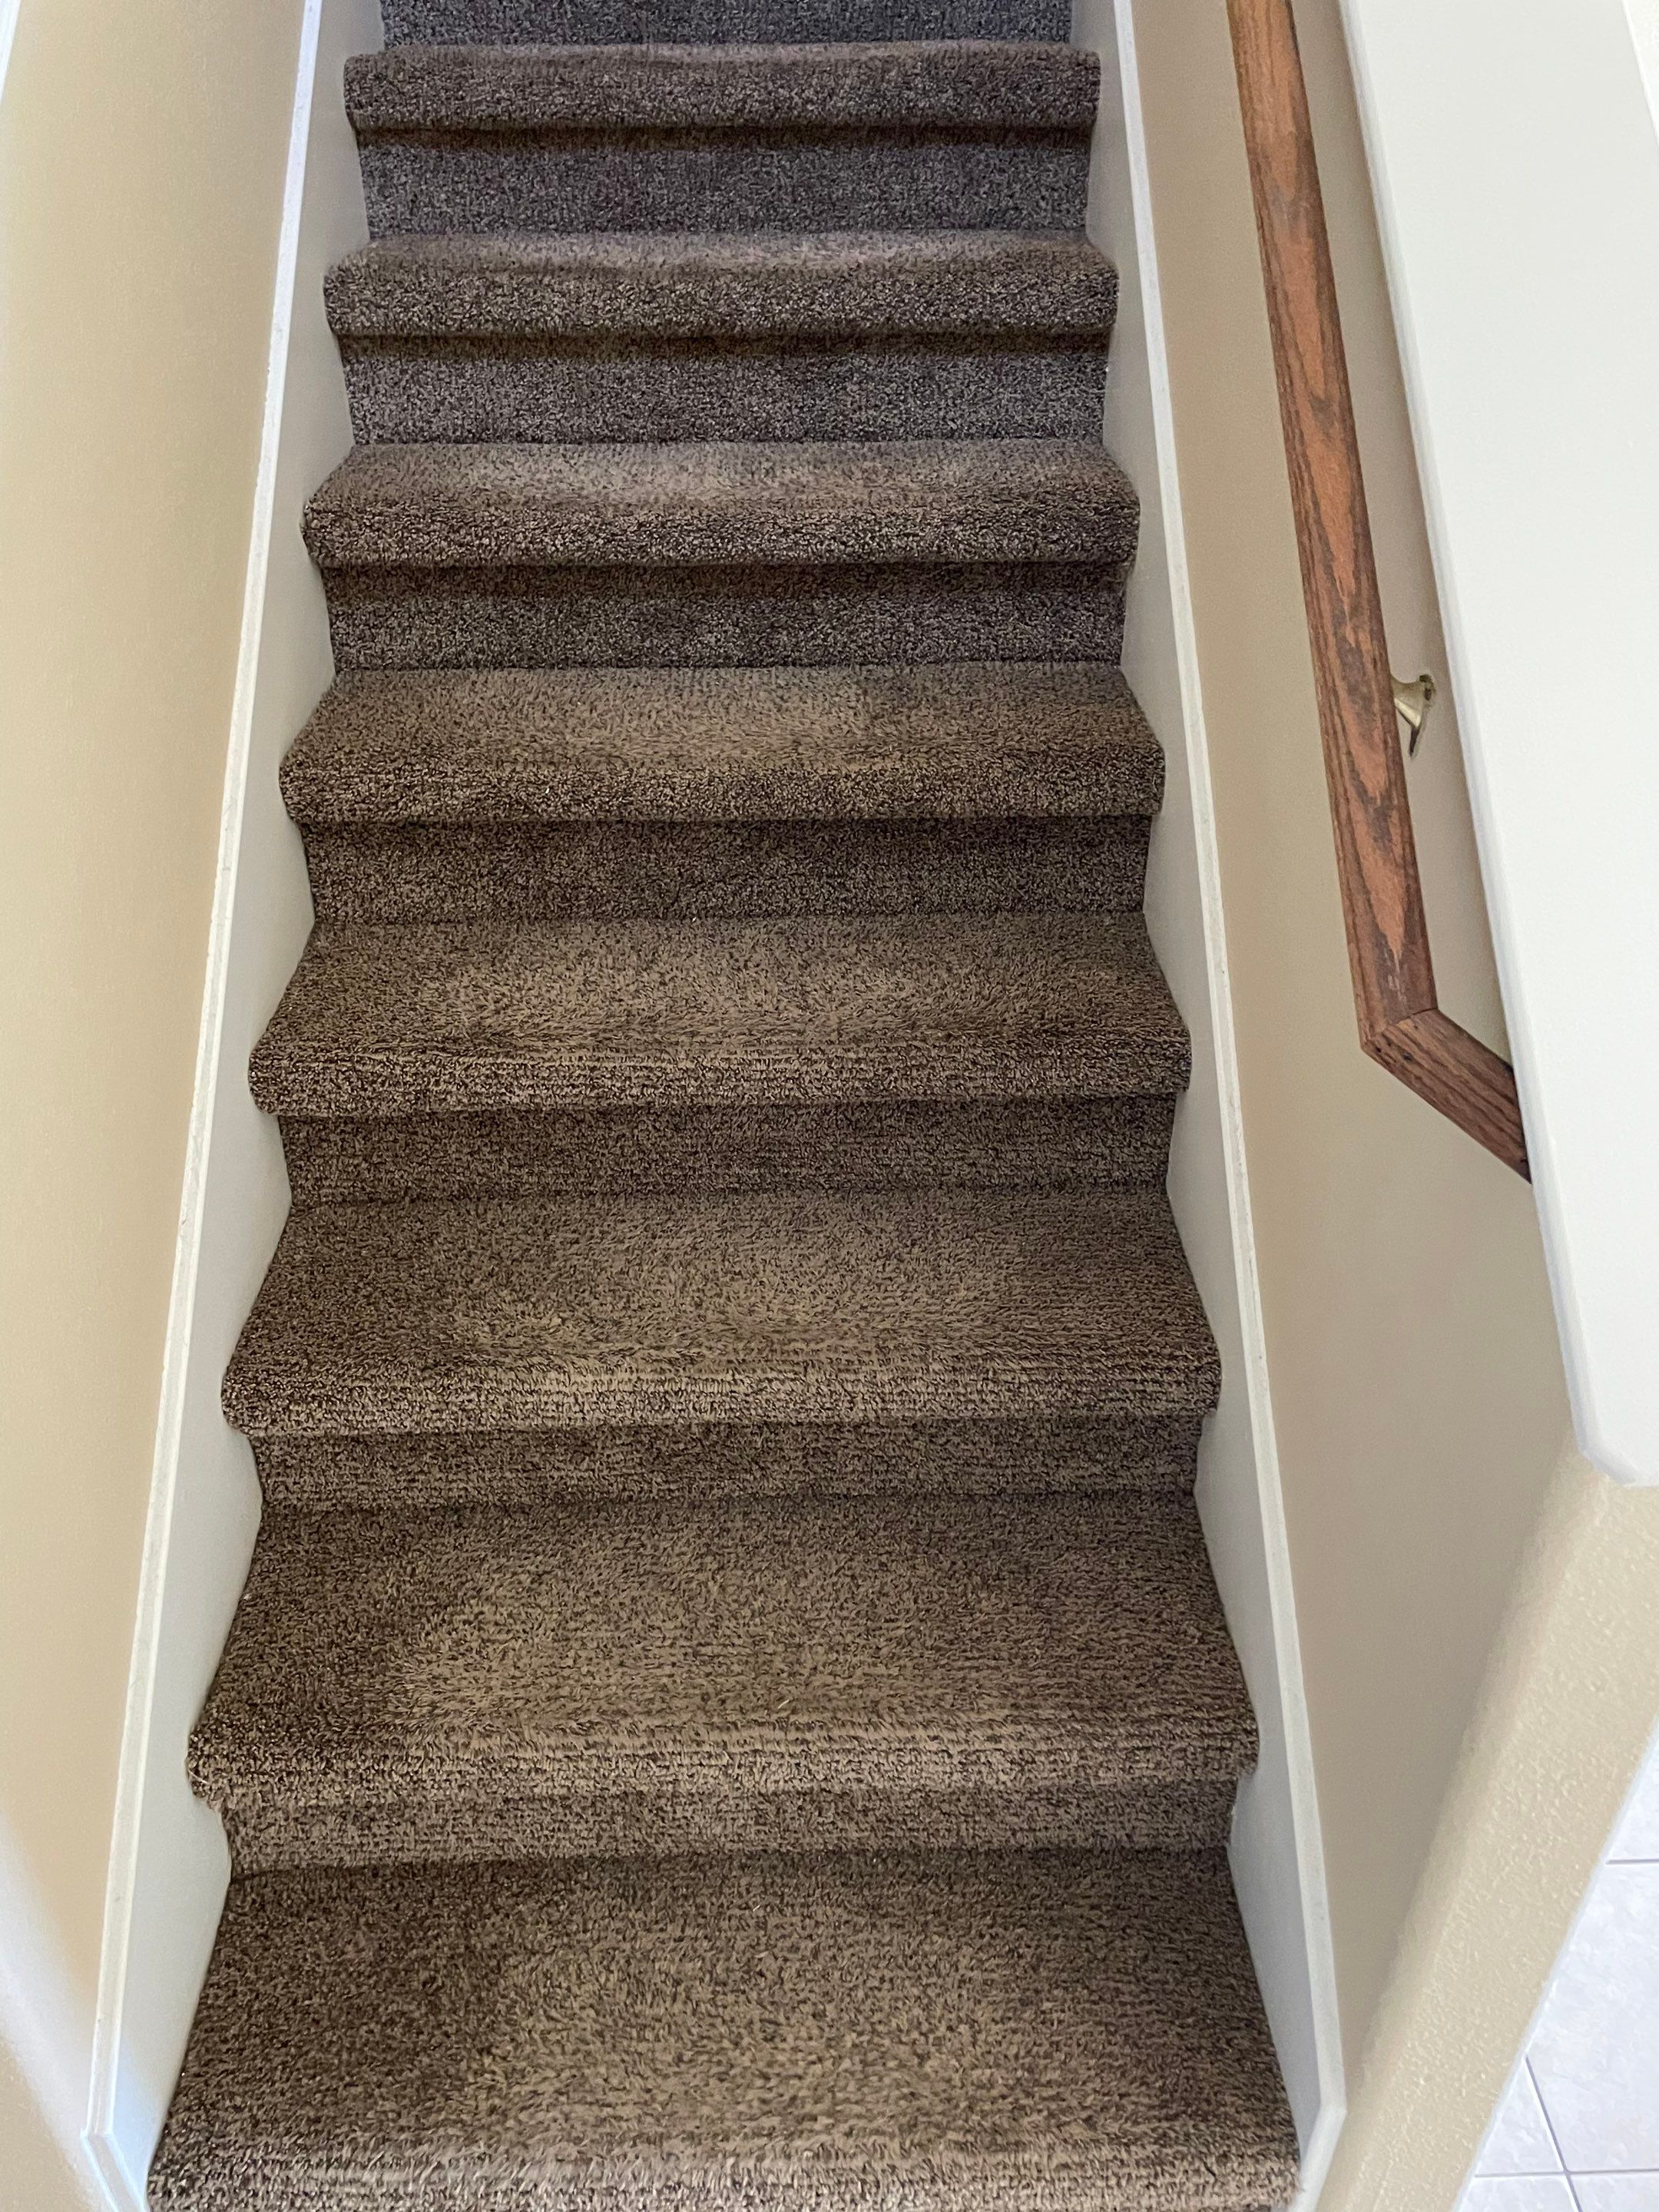 carpet cleaning on staircase deep clean dirt removal refreshing fibers restoring look